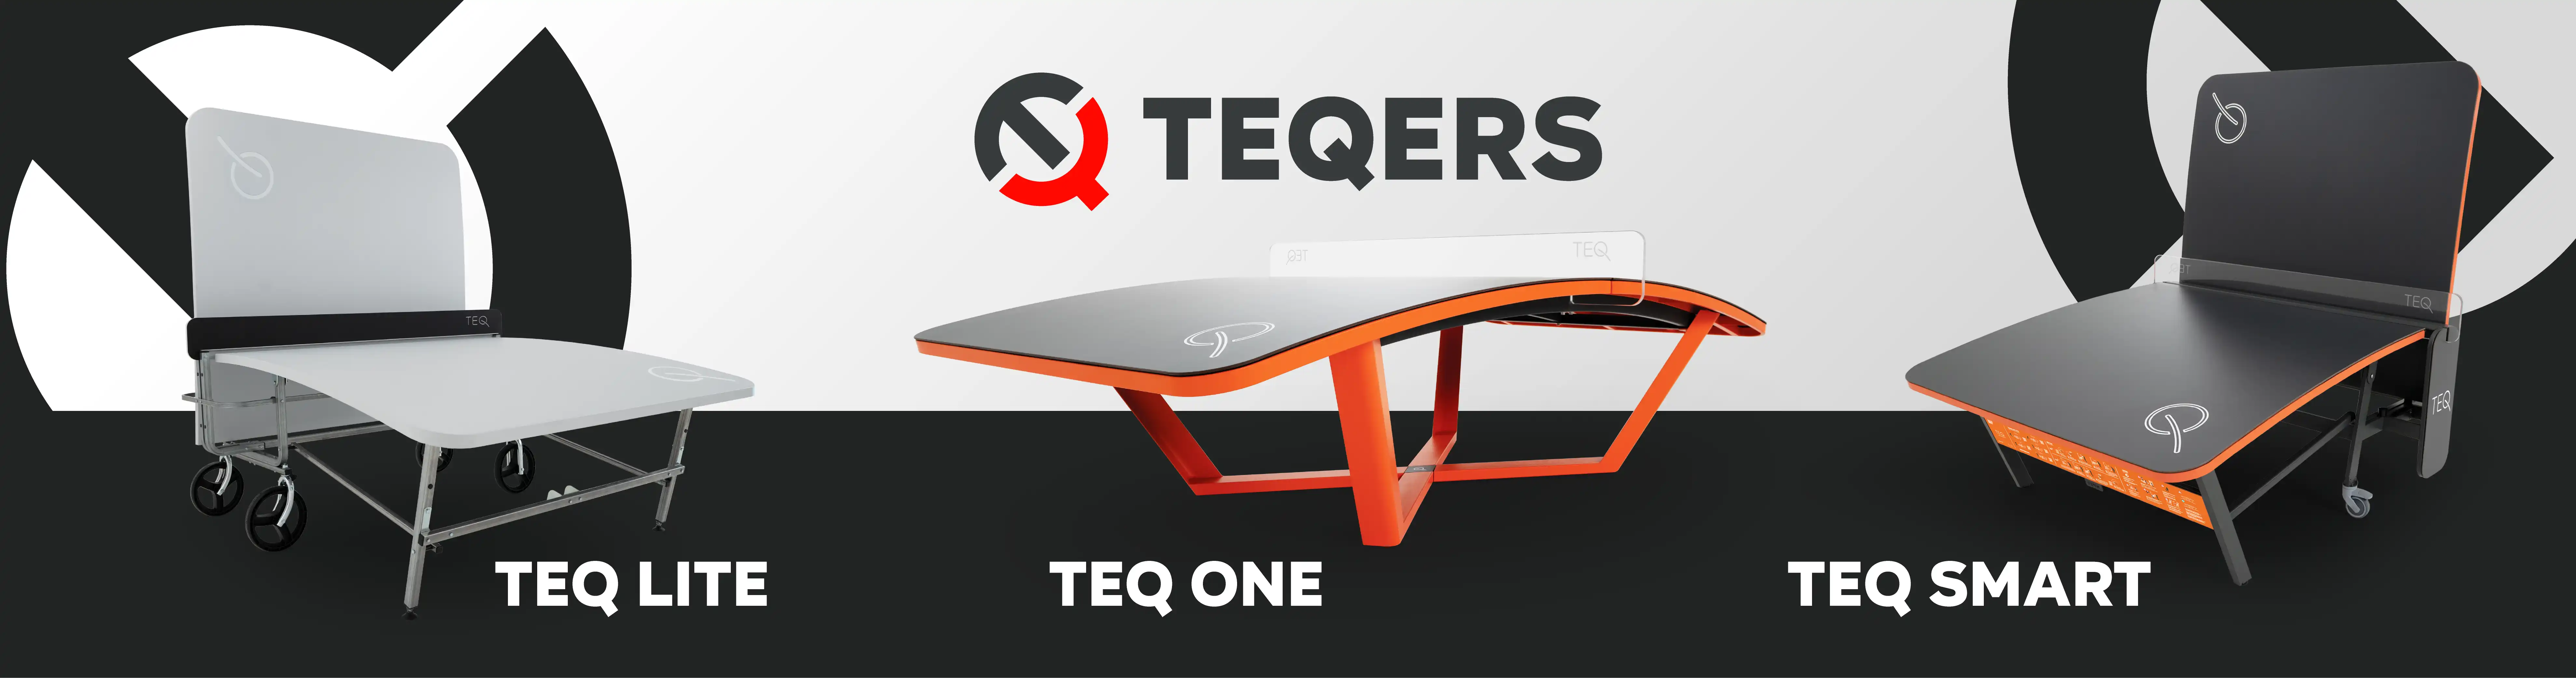 TEQERS™